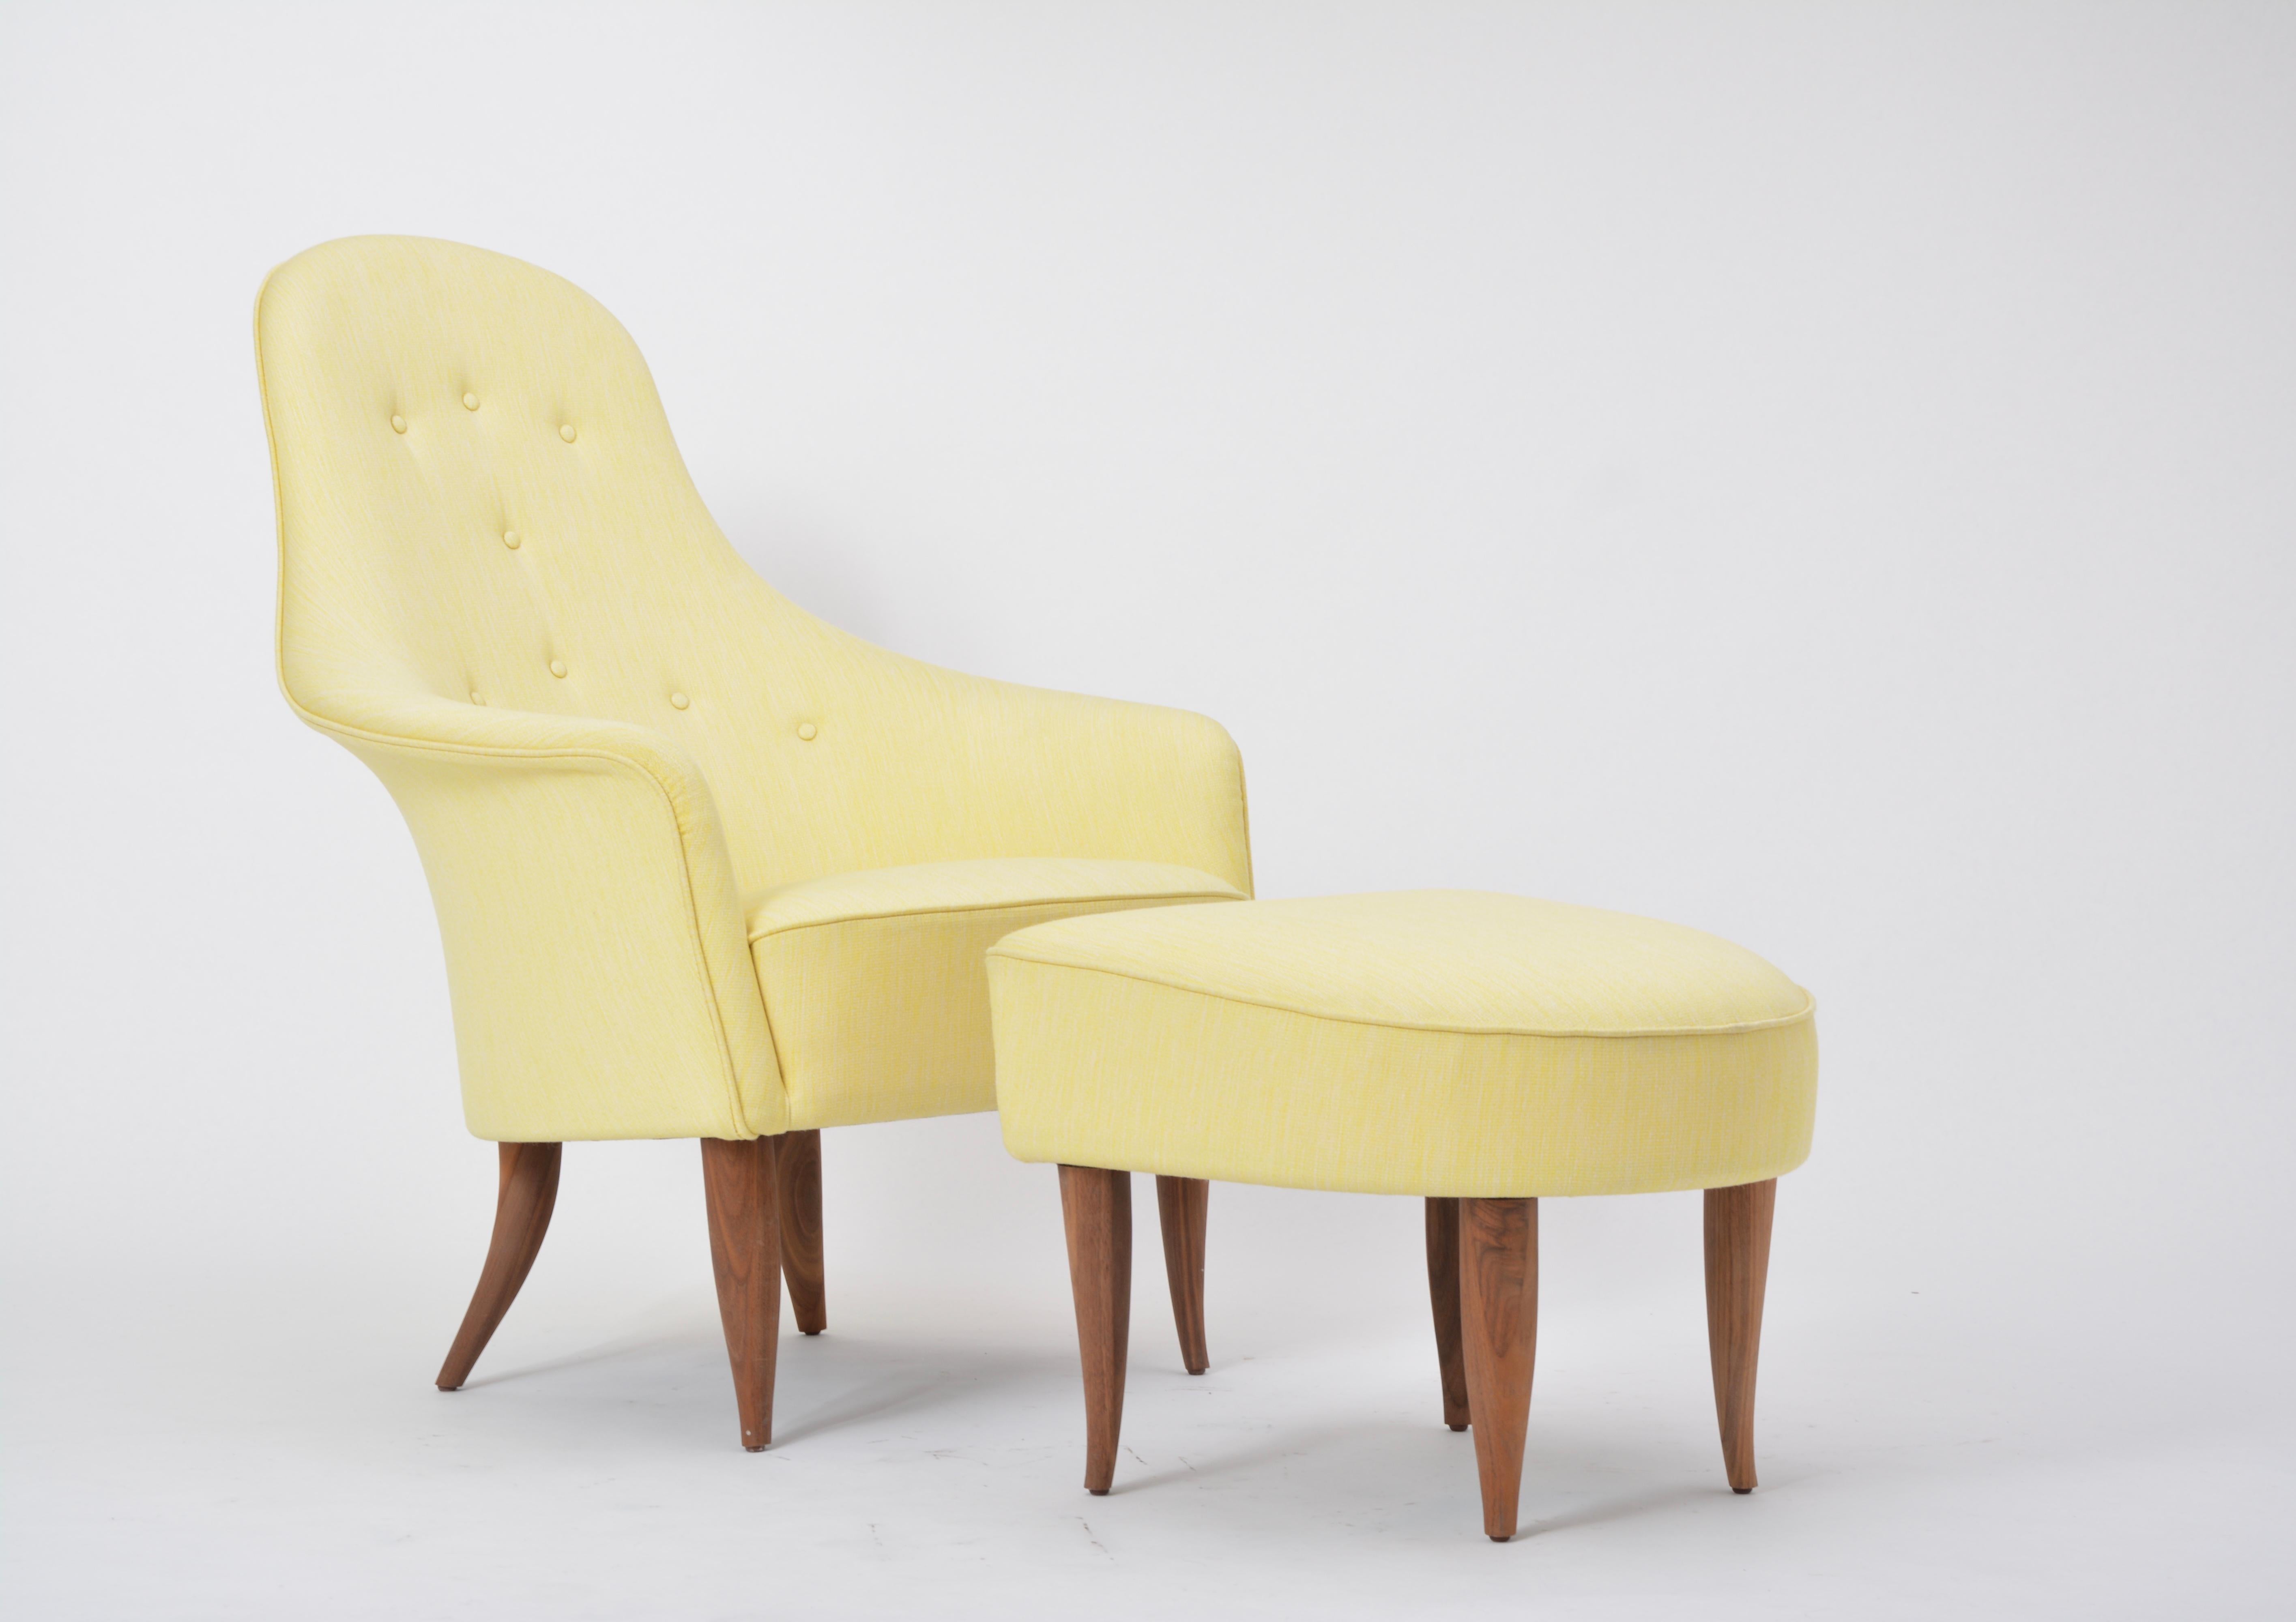 'Large Adam' Reupholstered Lounge Chair with Ottoman by Kerstin Hörlin-Holmquist (Walnuss)